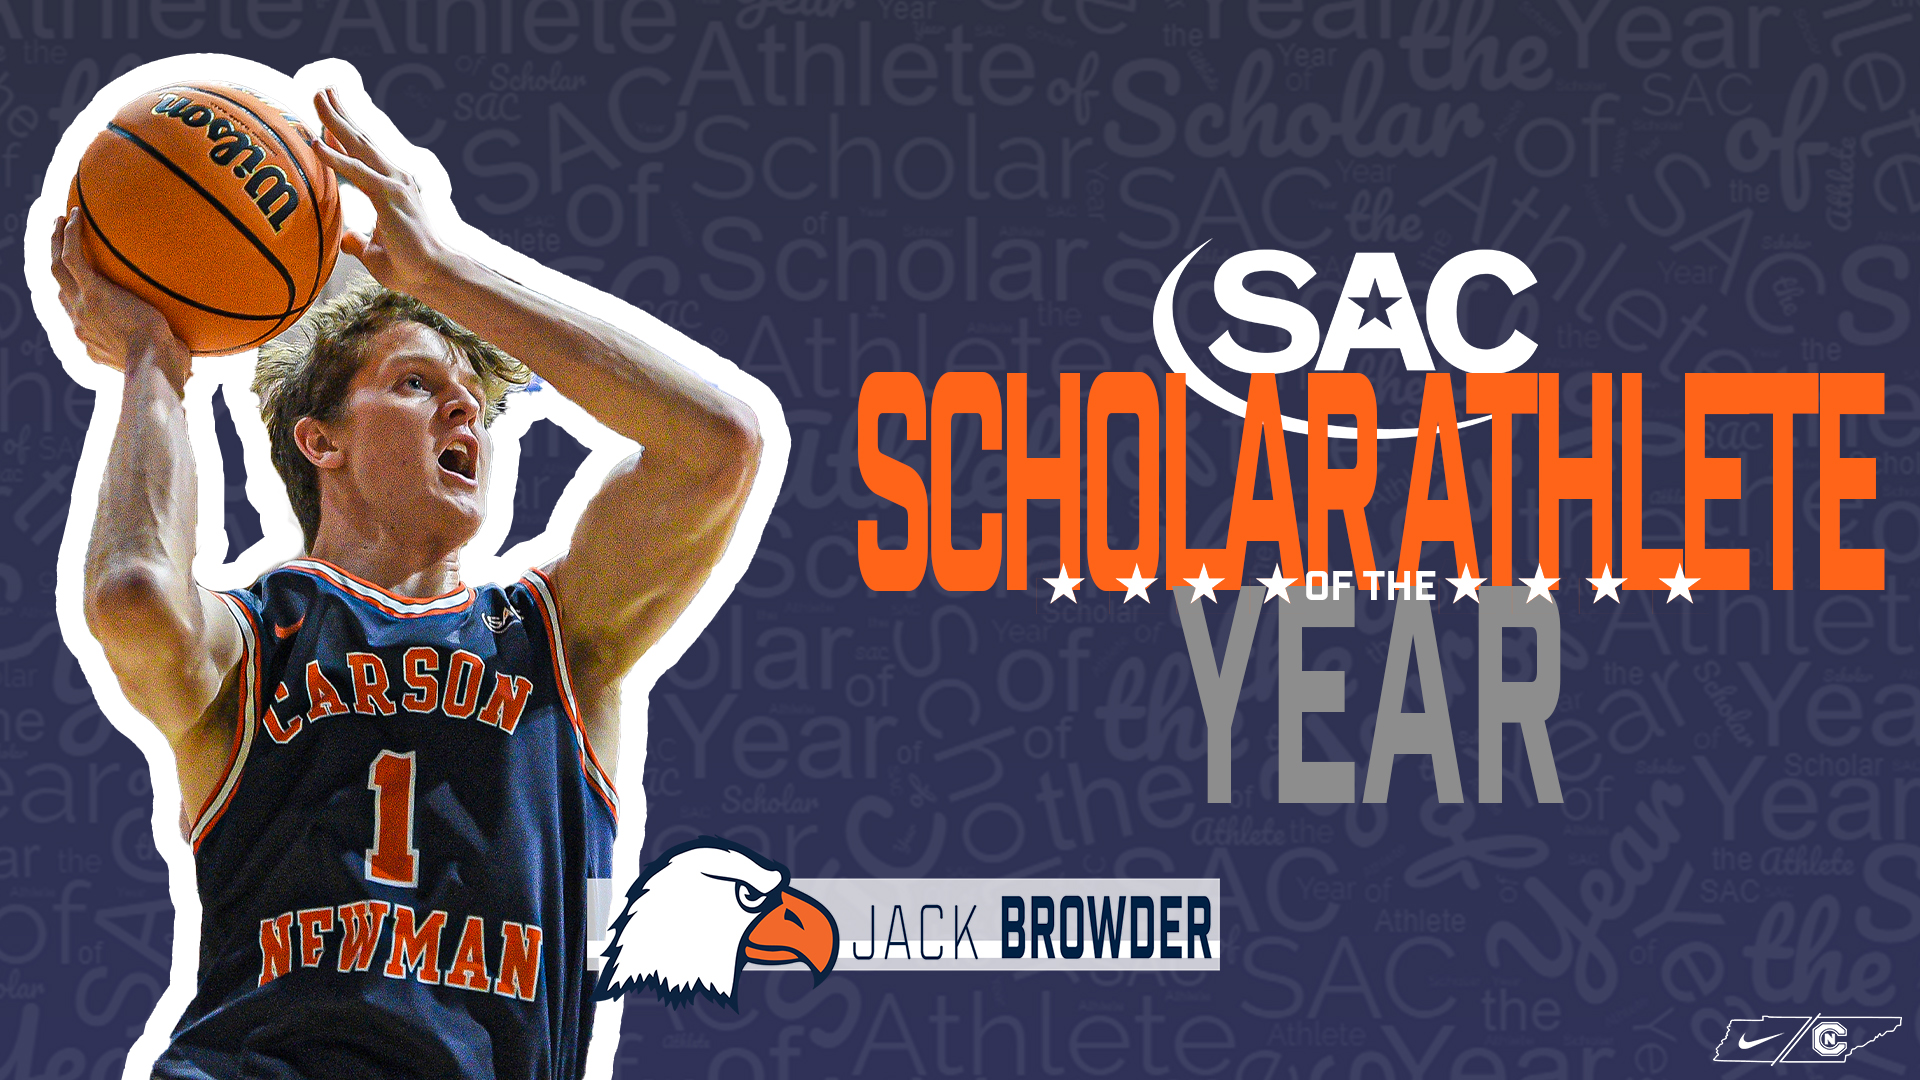 Browder recognized as SAC Scholar Athlete of the Year